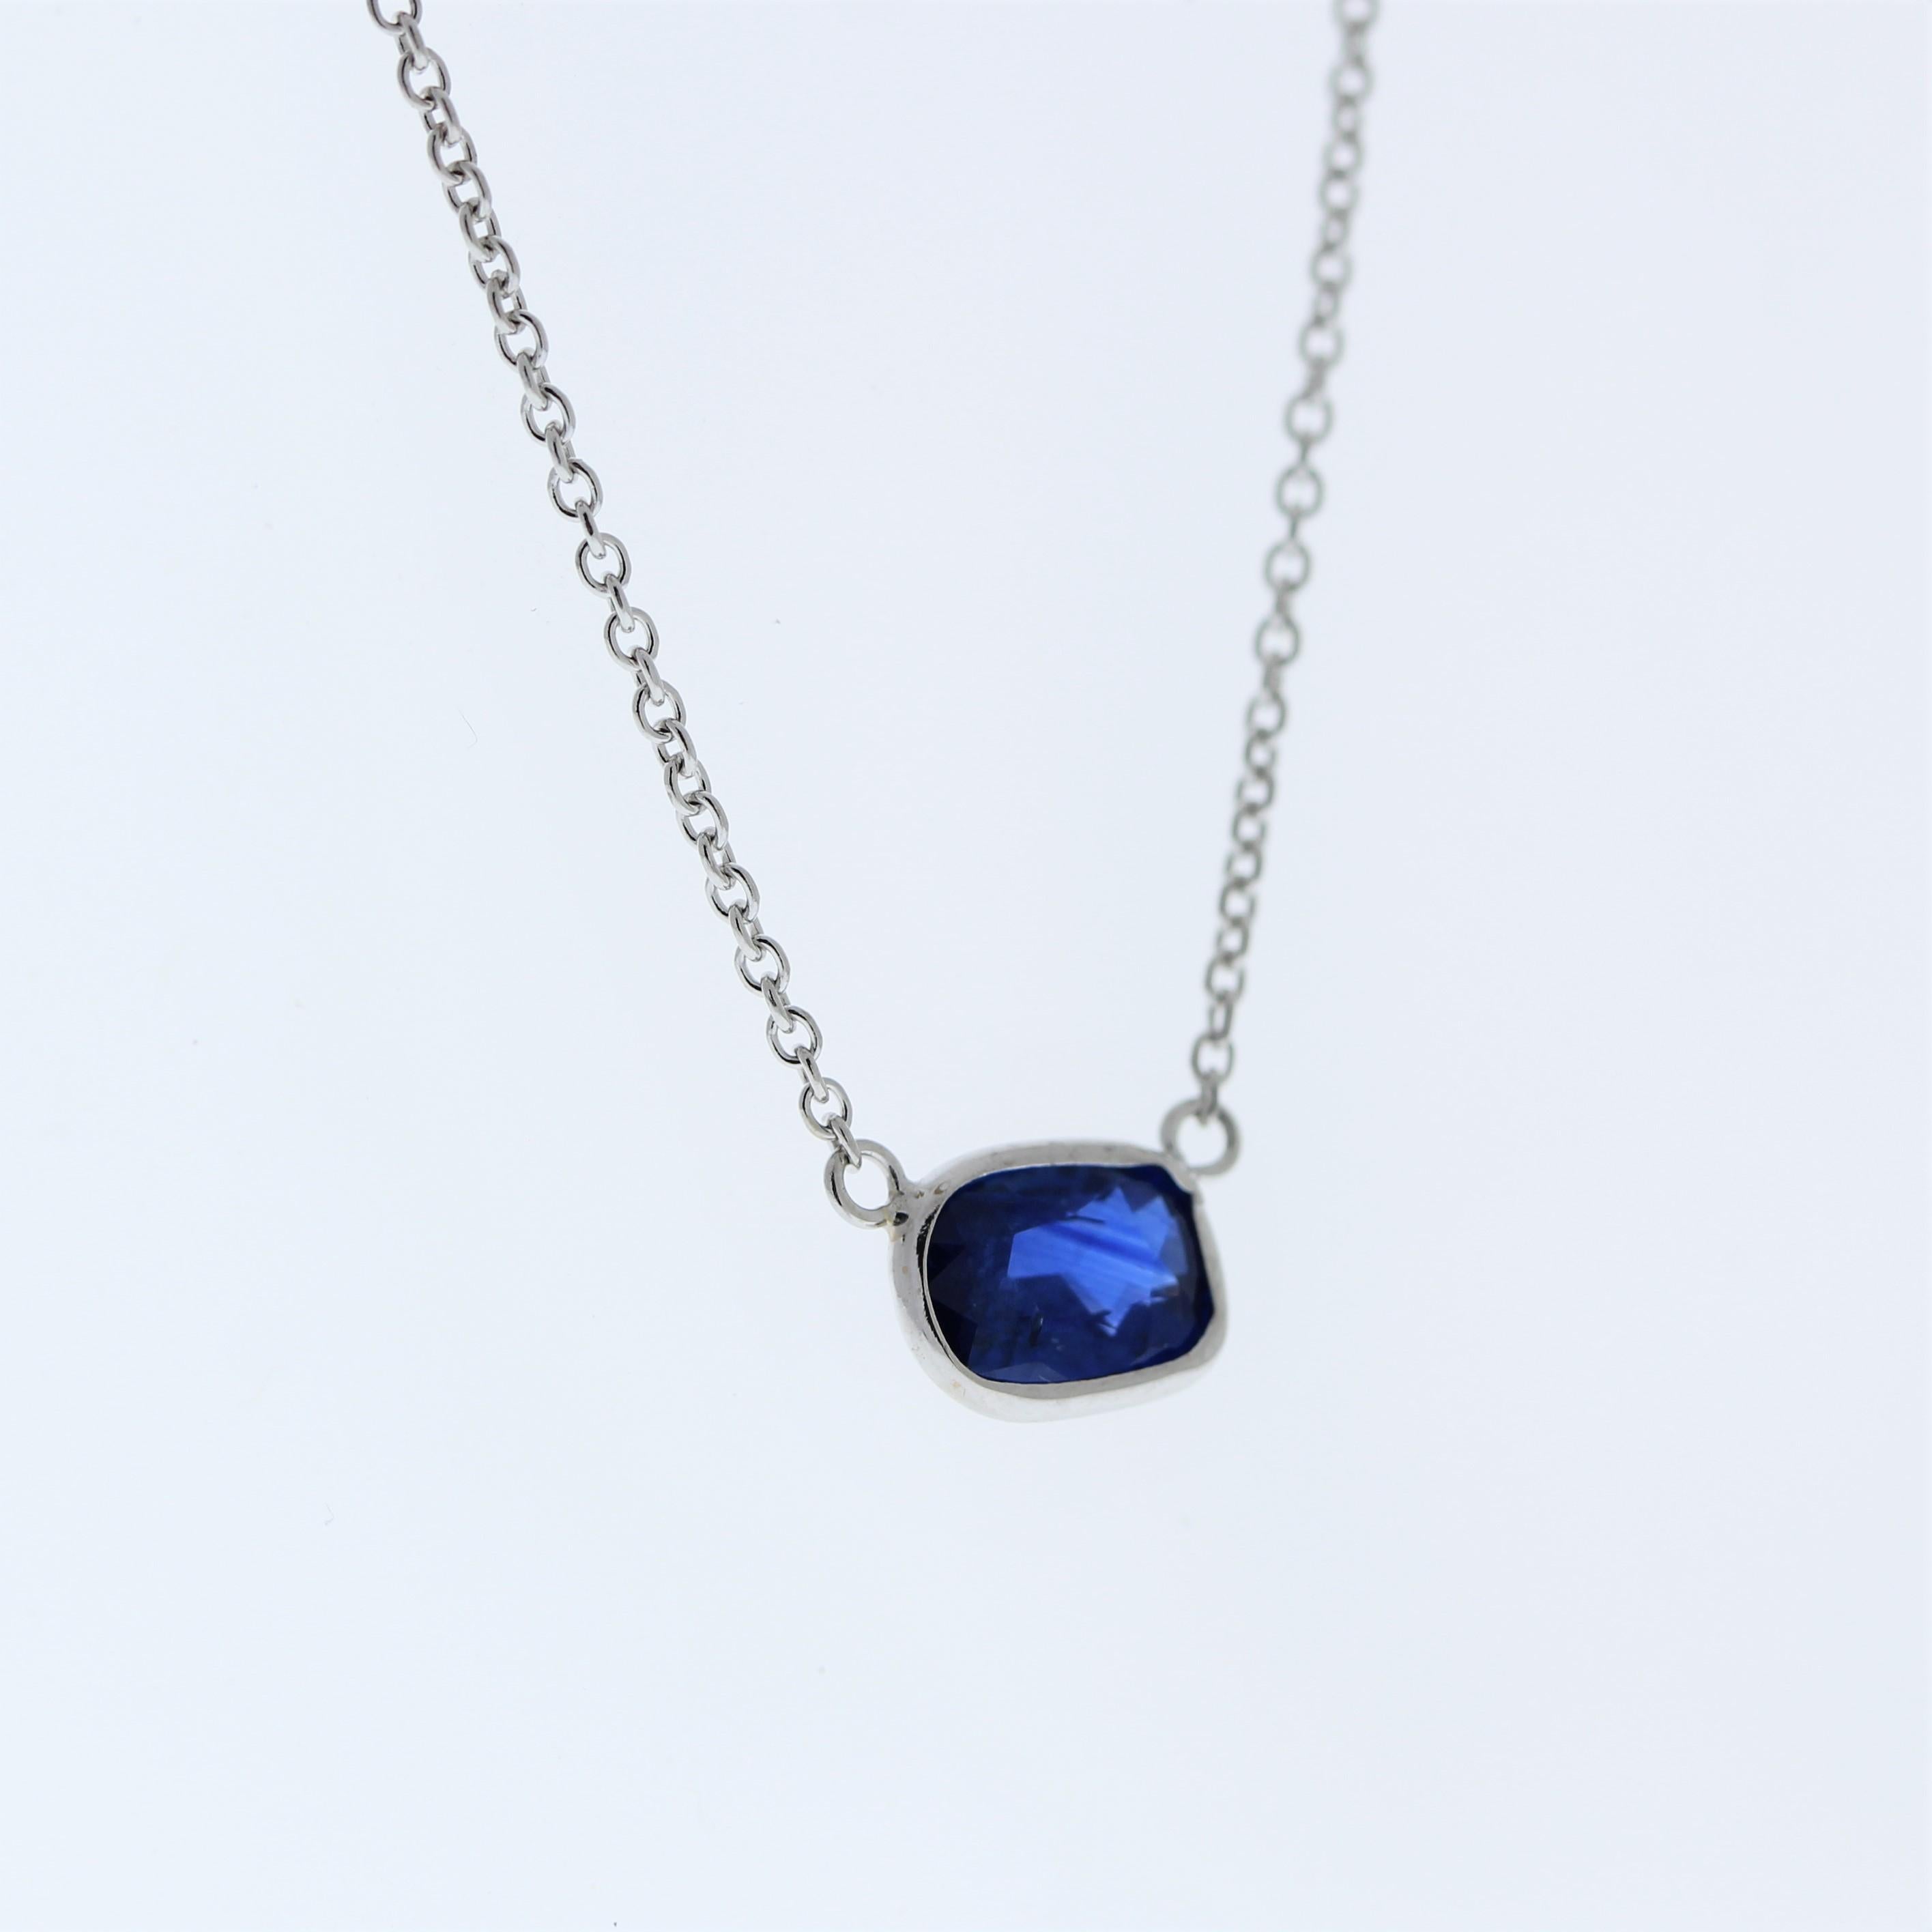 The necklace features a 1.56-carat cushion-cut blue sapphire set in a 14 karat white gold pendant or setting. The cushion cut and the blue sapphire's color against the white gold setting are likely to create an elegant and versatile fashion piece,